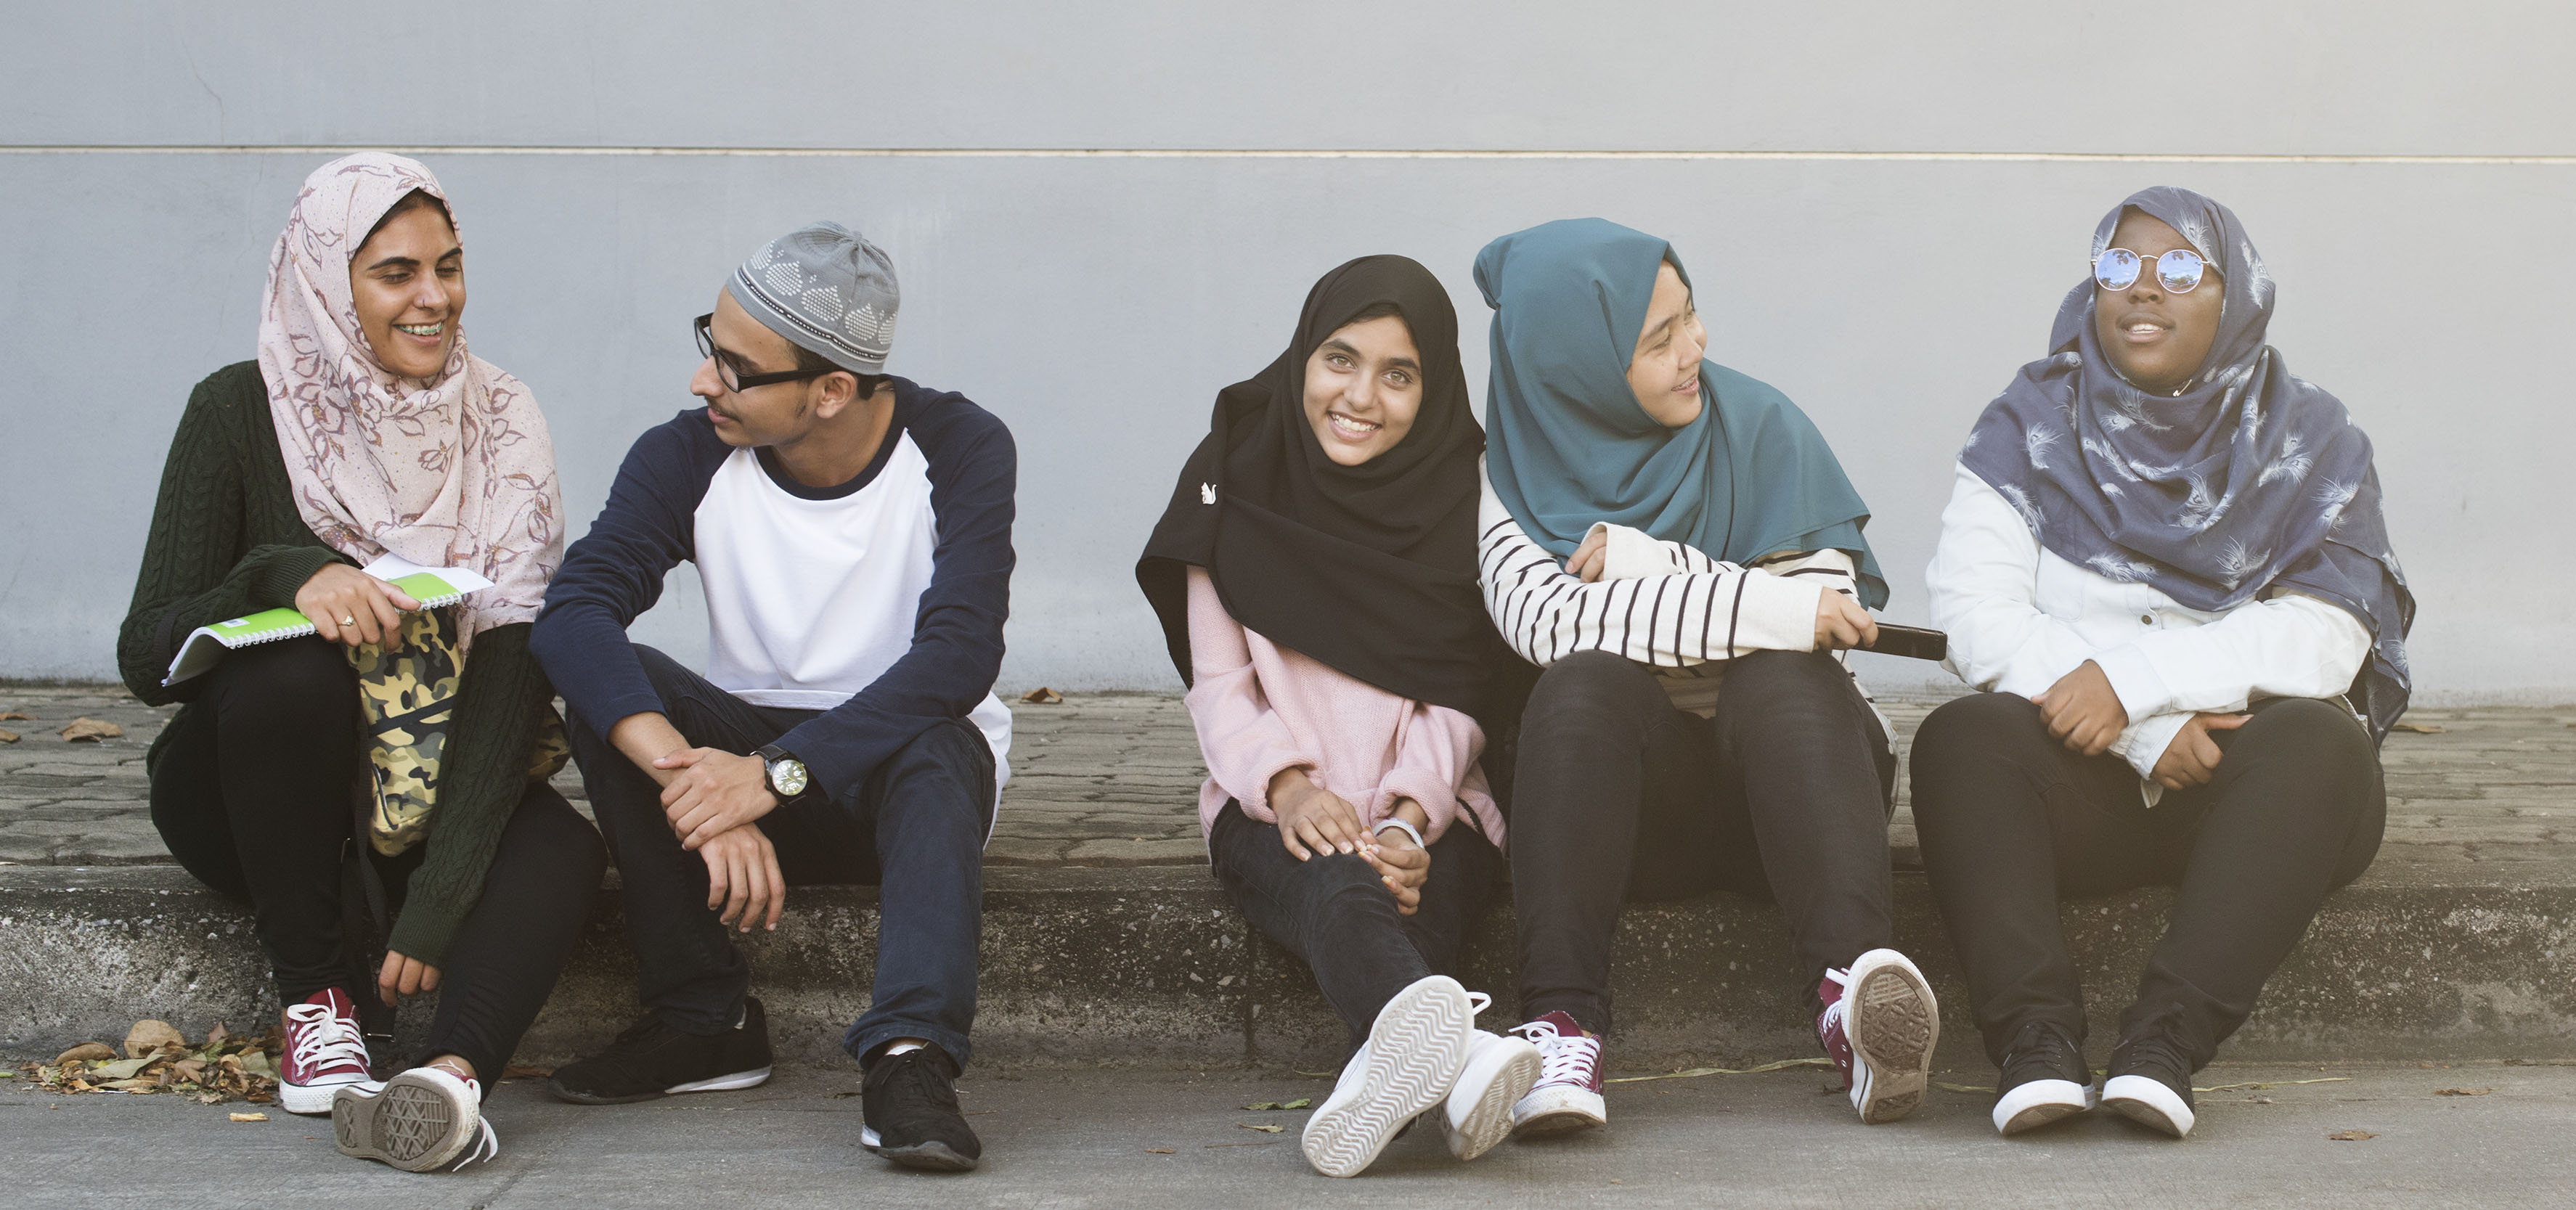 Www Sex Girl Rajap - 11 Ways to Build modesty in Young Muslims | SoundVision.com